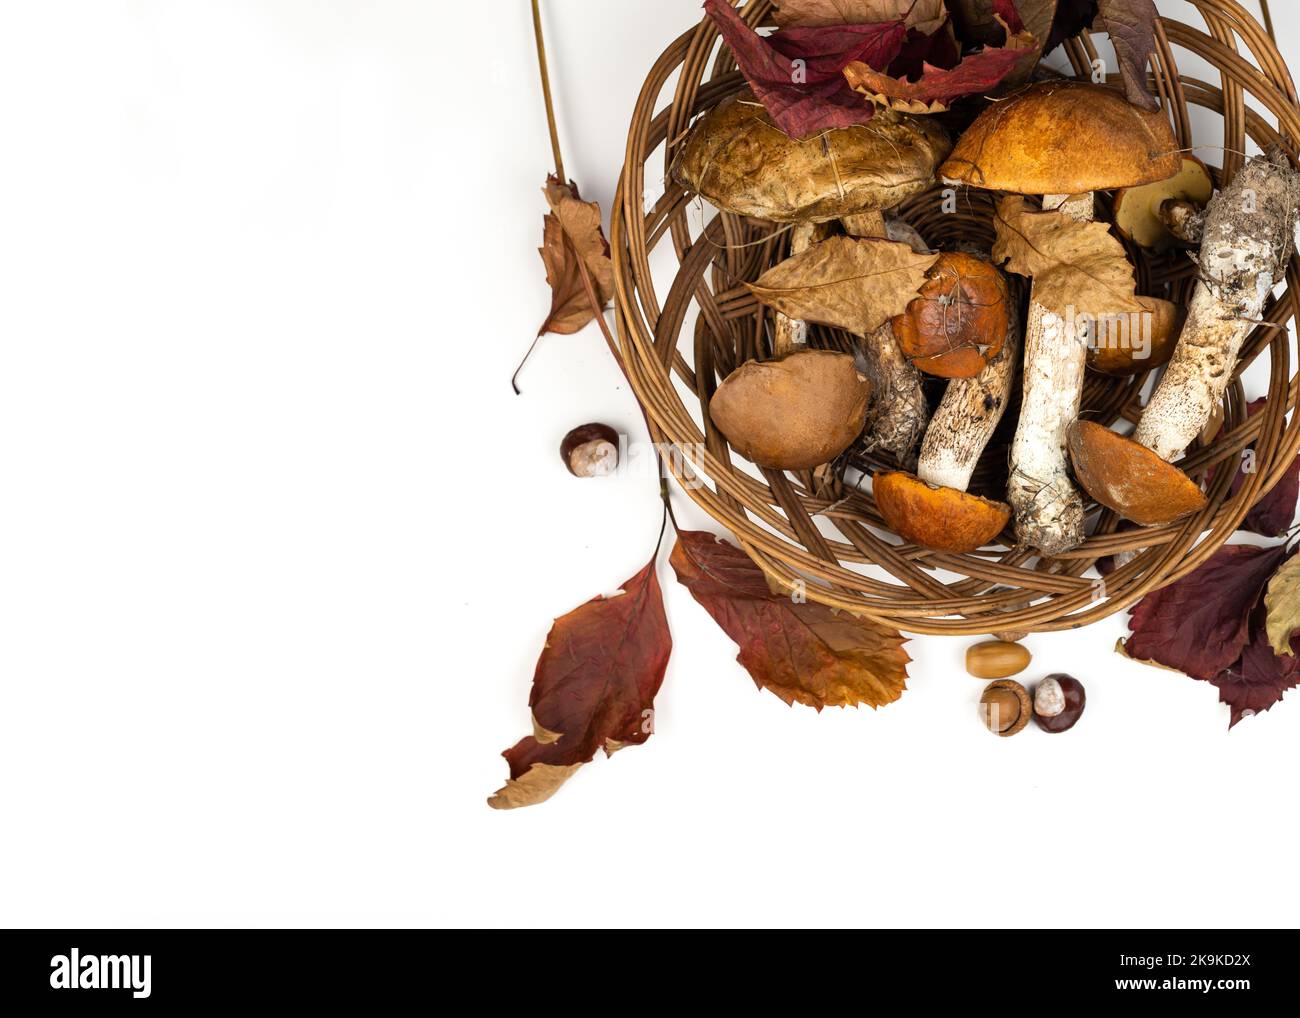 Still life with forest mushrooms and fallen leaves. Porcini mushrooms and boletus mushrooms in a wicker basket. Autumn minimalist composition. Copy sp Stock Photo